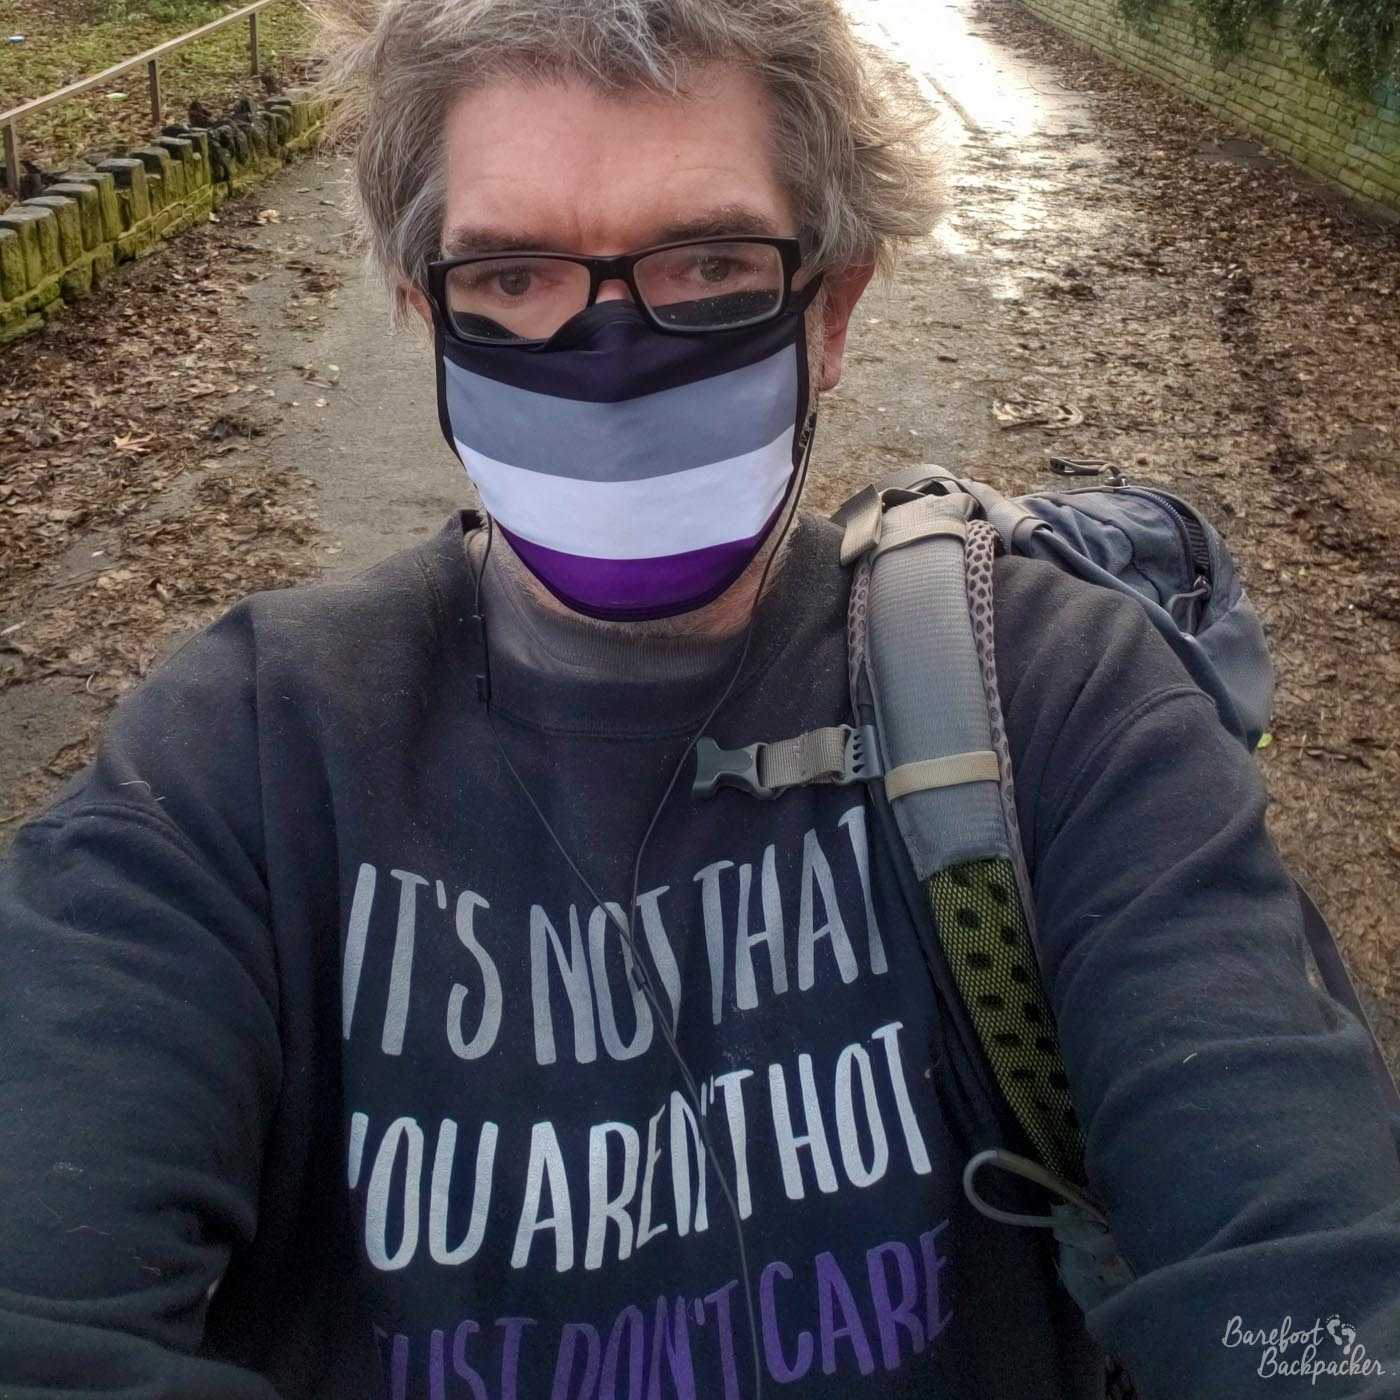 Man (again, that's tbd) standing on a pedestrianised street on a hill. The backpack is still there, over one shoulder and empty, but this time they're wearing a black sweatshirt with the caption 'it's not that you're not hot, I just don't care' in white, grey, and purple. They're also wearing a face-mask with black, grey, white, and purple stripes.